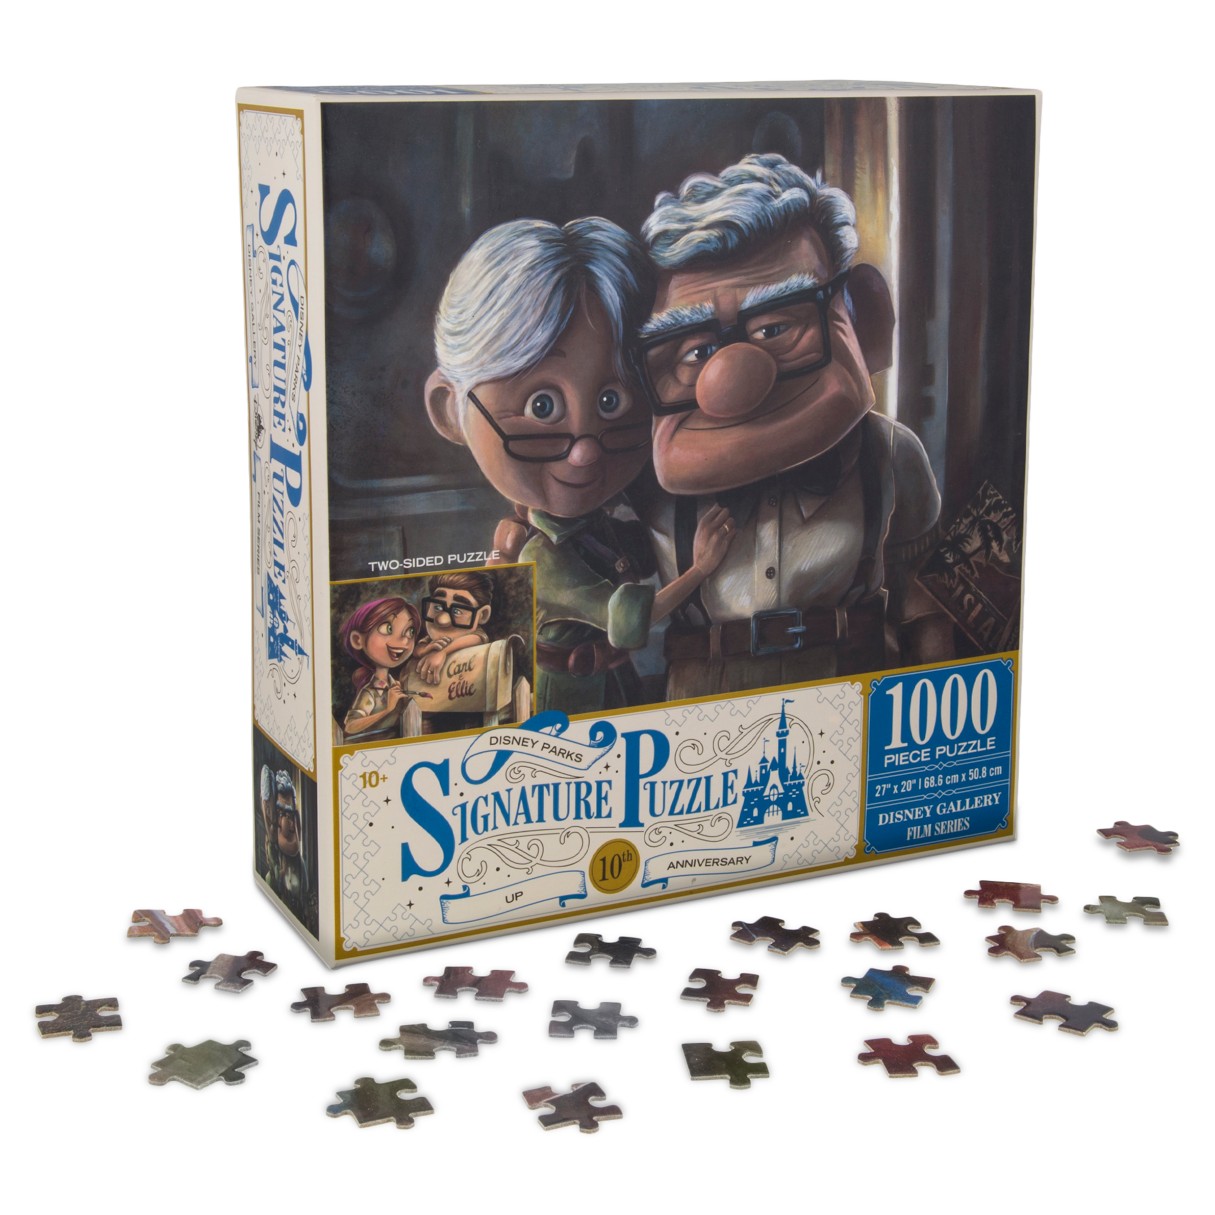 Up 10th Anniversary Jigsaw Puzzle